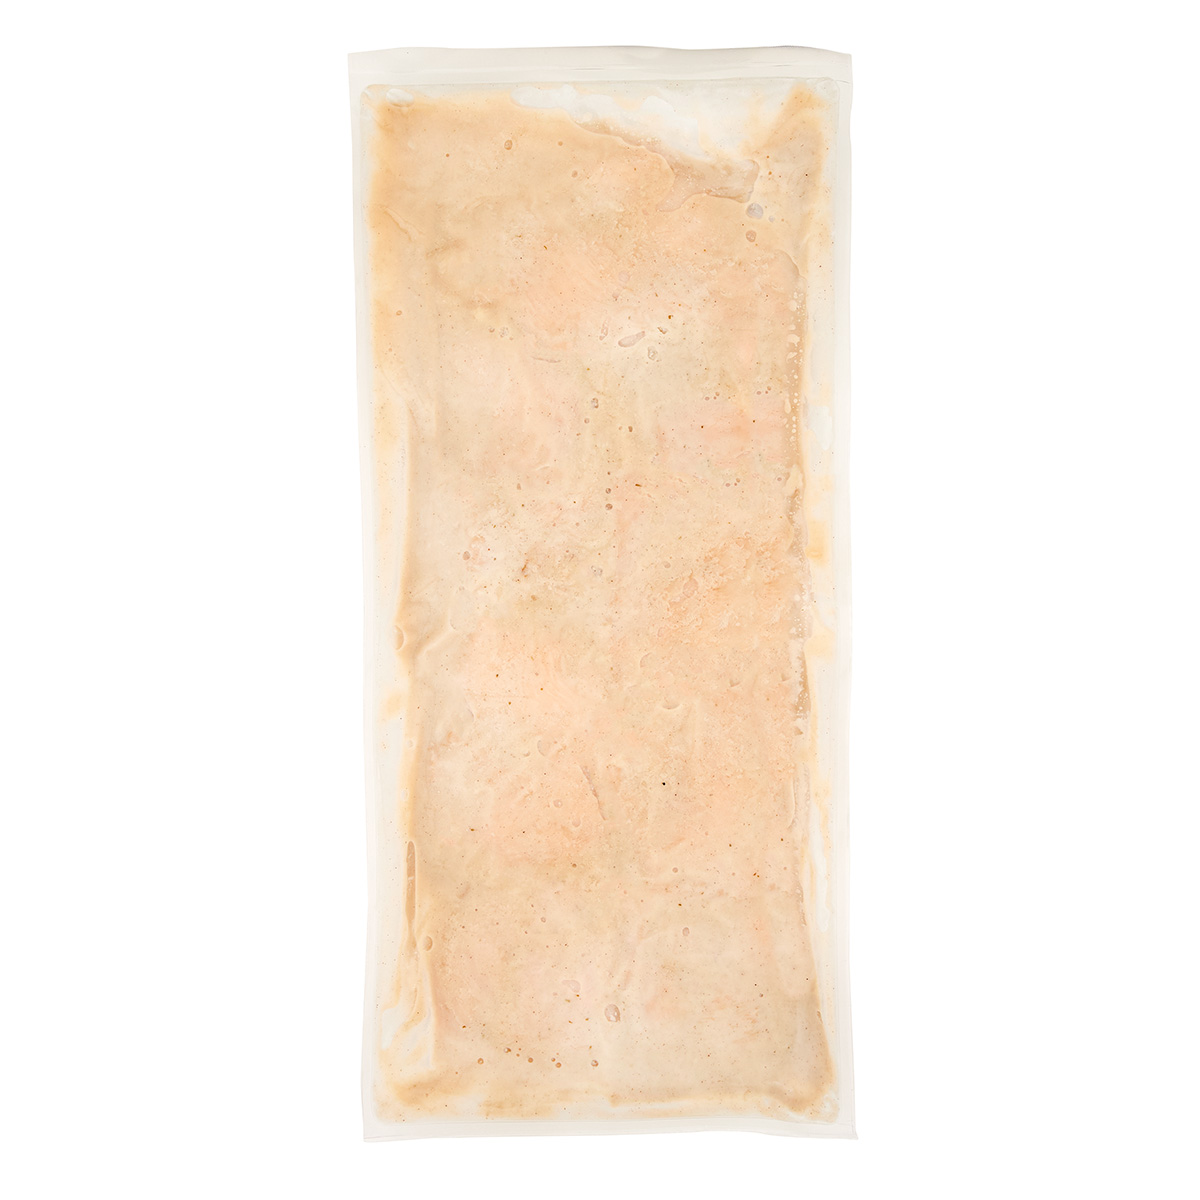 Flash 180 battered sous-vide cooked chicken breast product in package